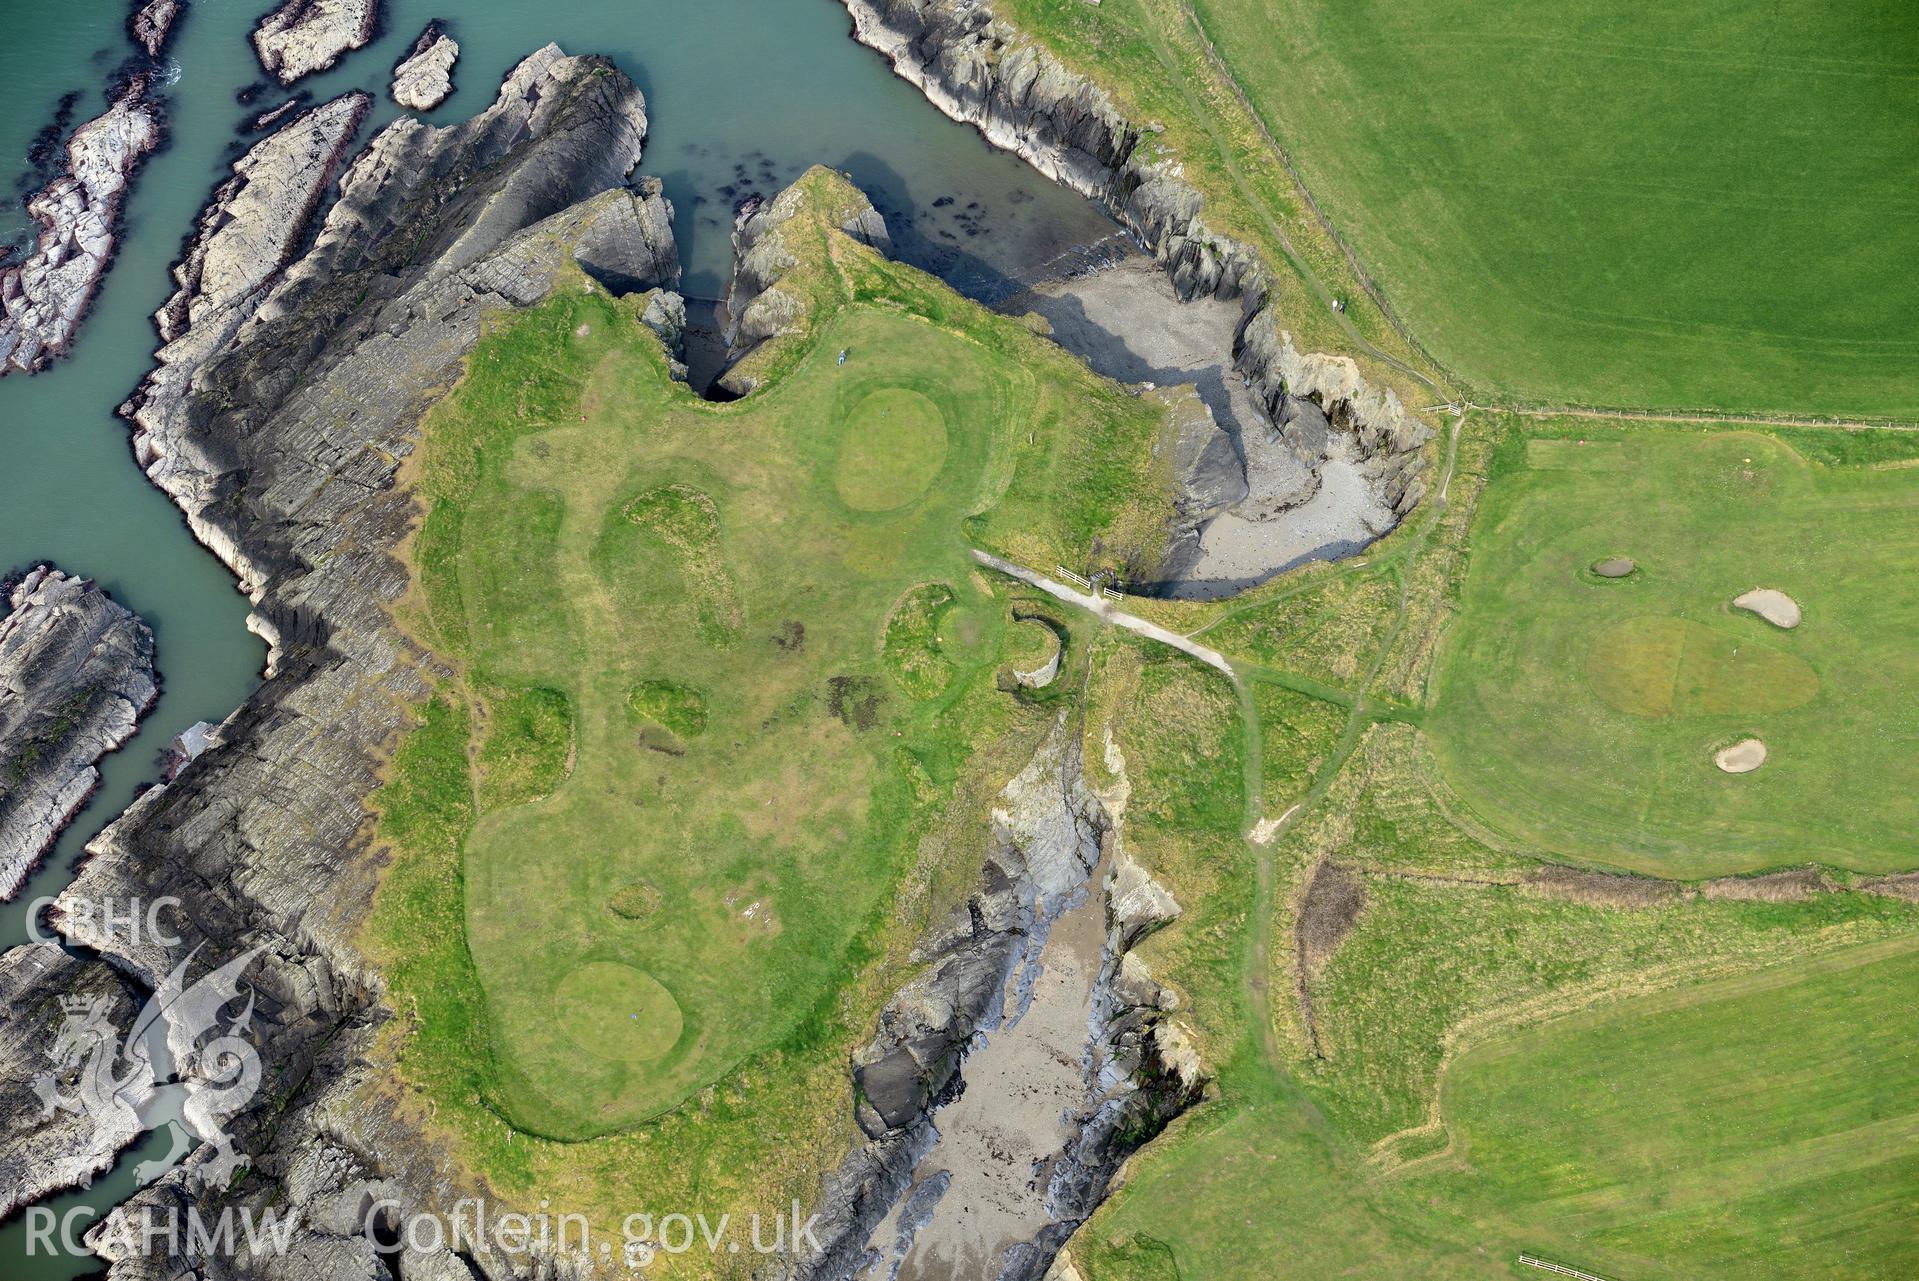 Royal Commission aerial photograph of Gwbert promontory fort taken on 27th March 2017. Baseline aerial reconnaissance survey for the CHERISH Project. ? Crown: CHERISH PROJECT 2017. Produced with EU funds through the Ireland Wales Co-operation Programme 2014-2020. All material made freely available through the Open Government Licence.